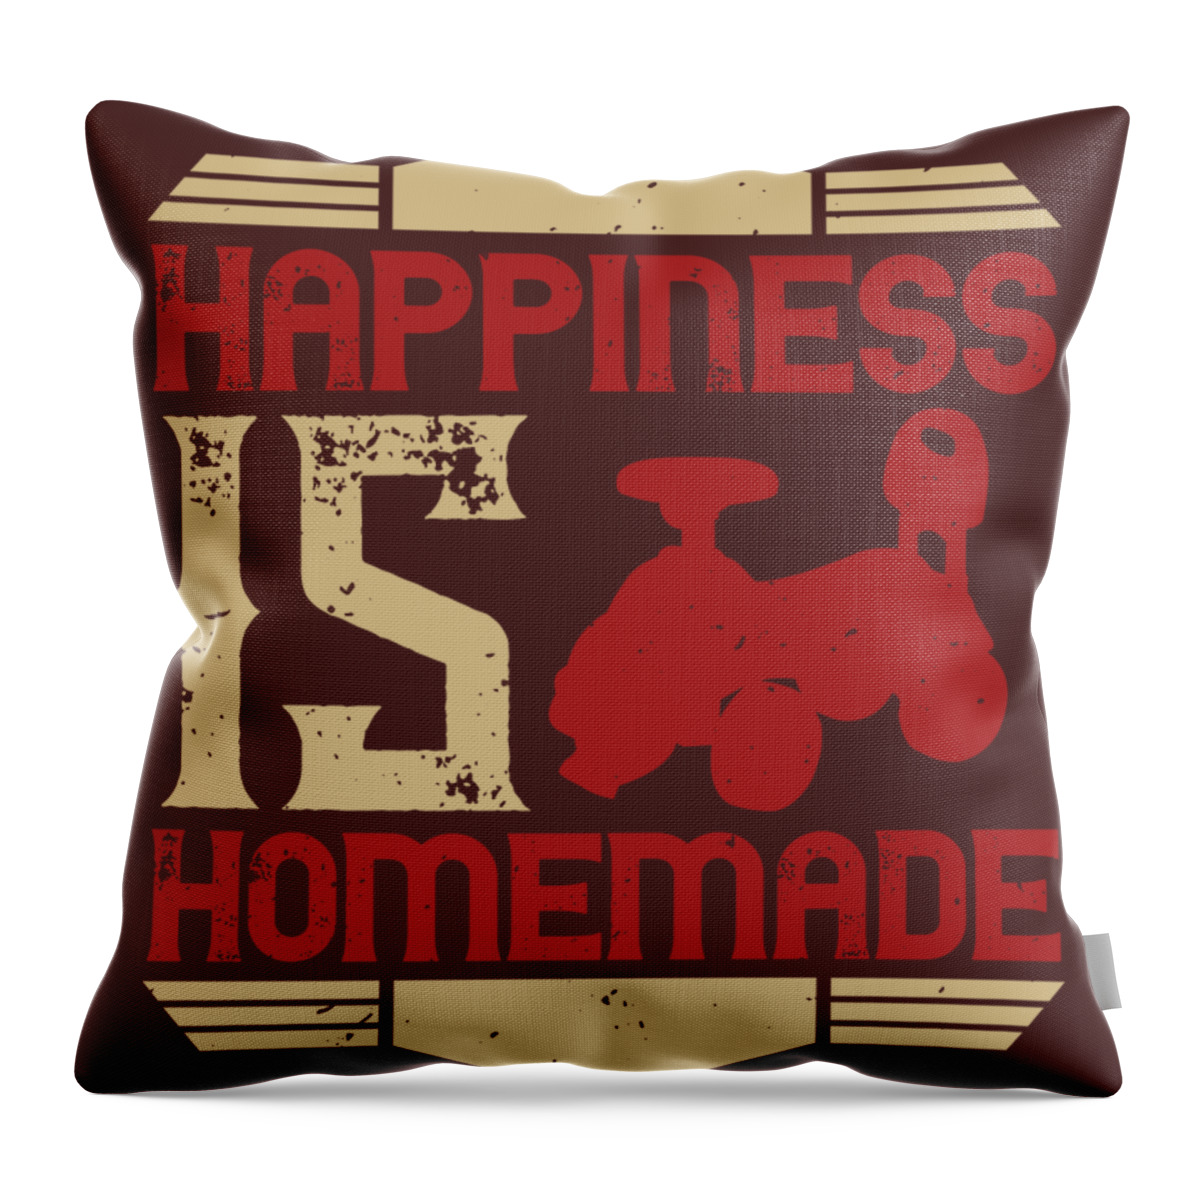 Baby Throw Pillow featuring the digital art Baby Child Gift Happiness Is Homemade by Jeff Creation